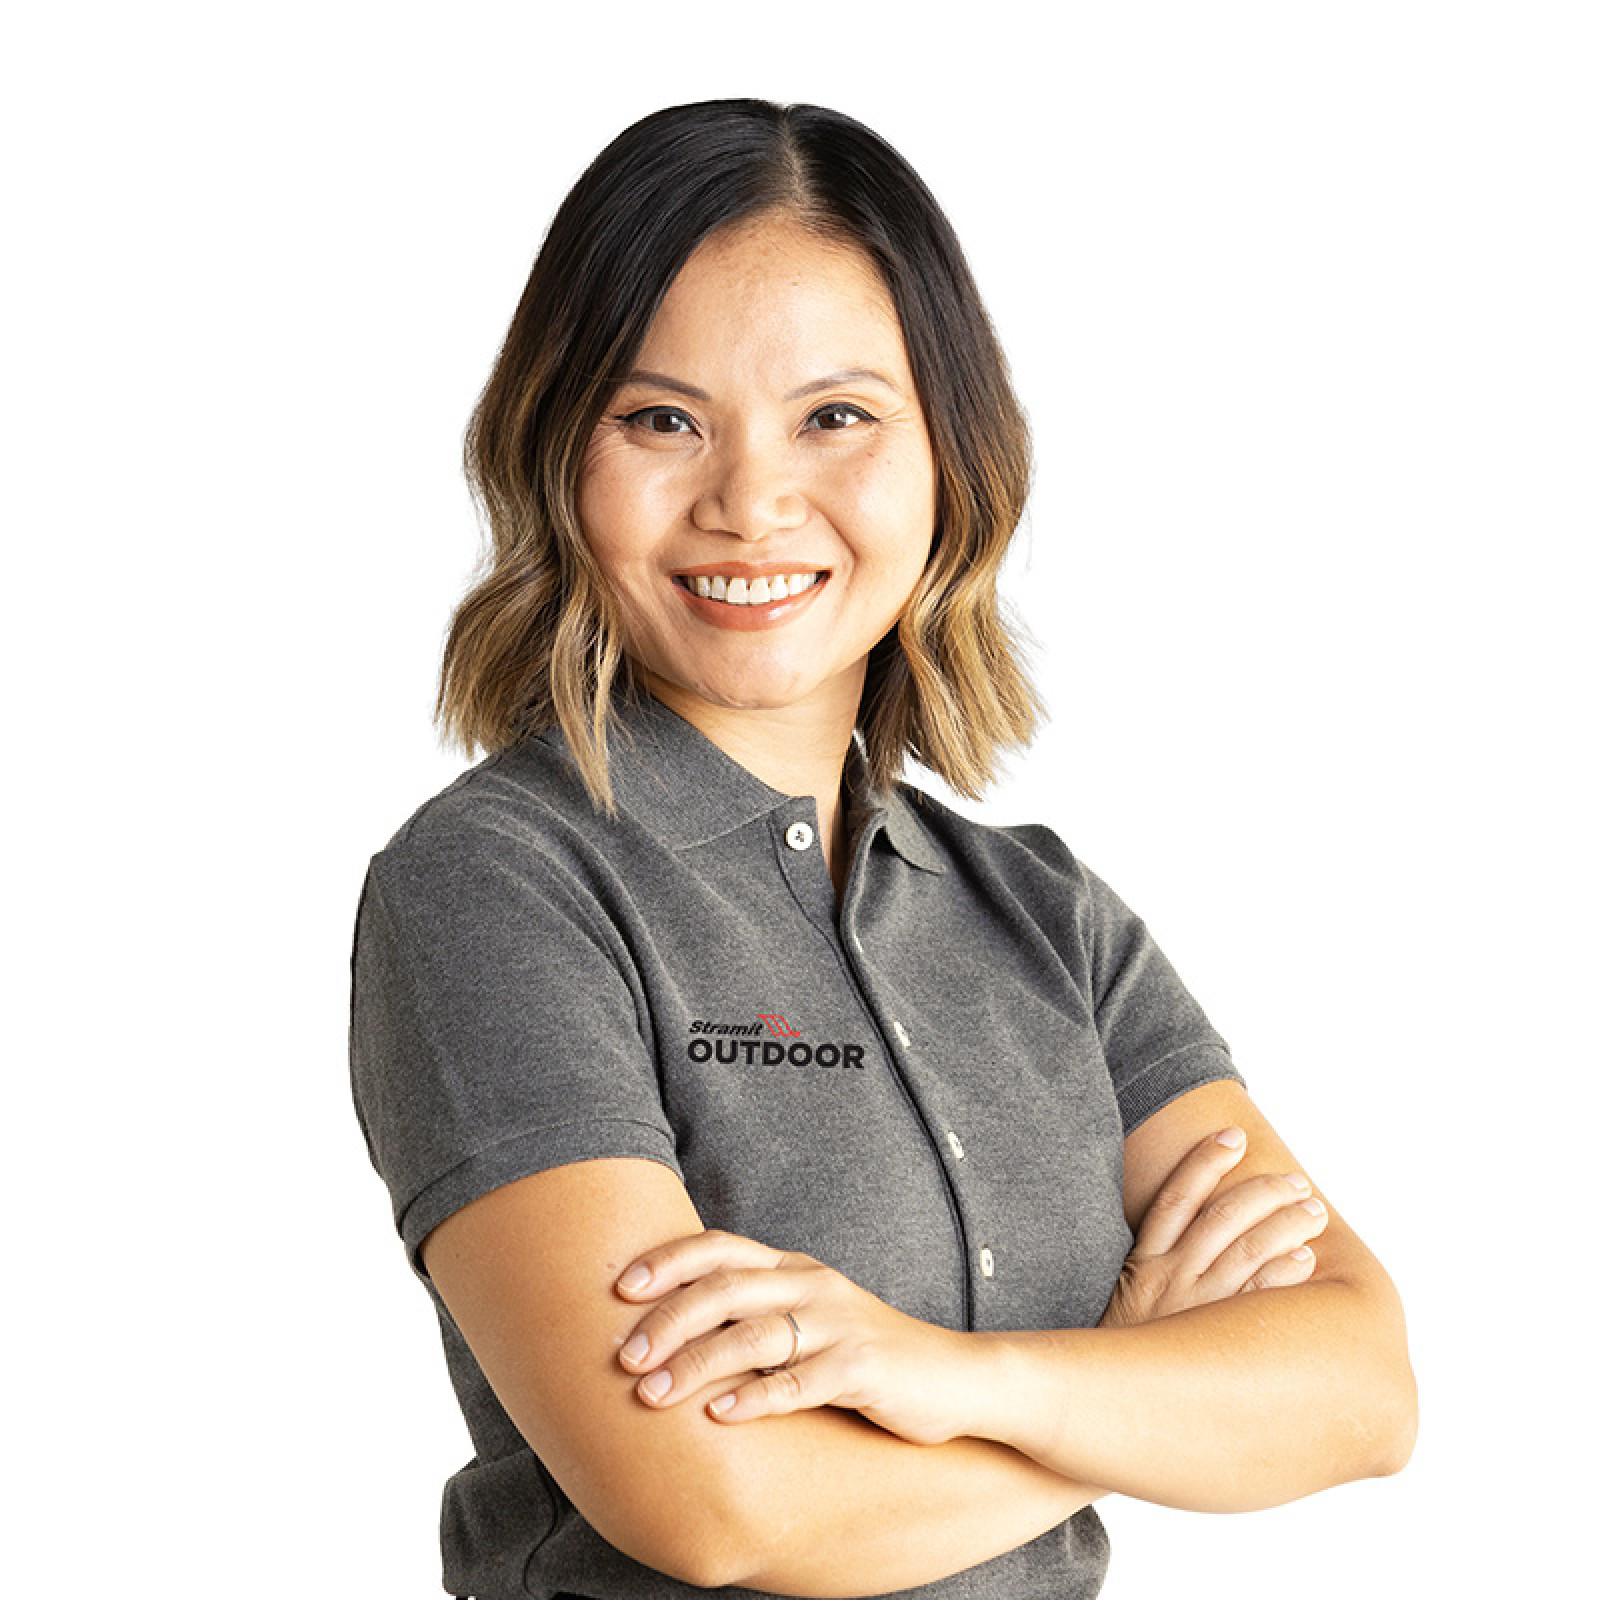 A smiling woman in a grey polo shirt stands with arms folded